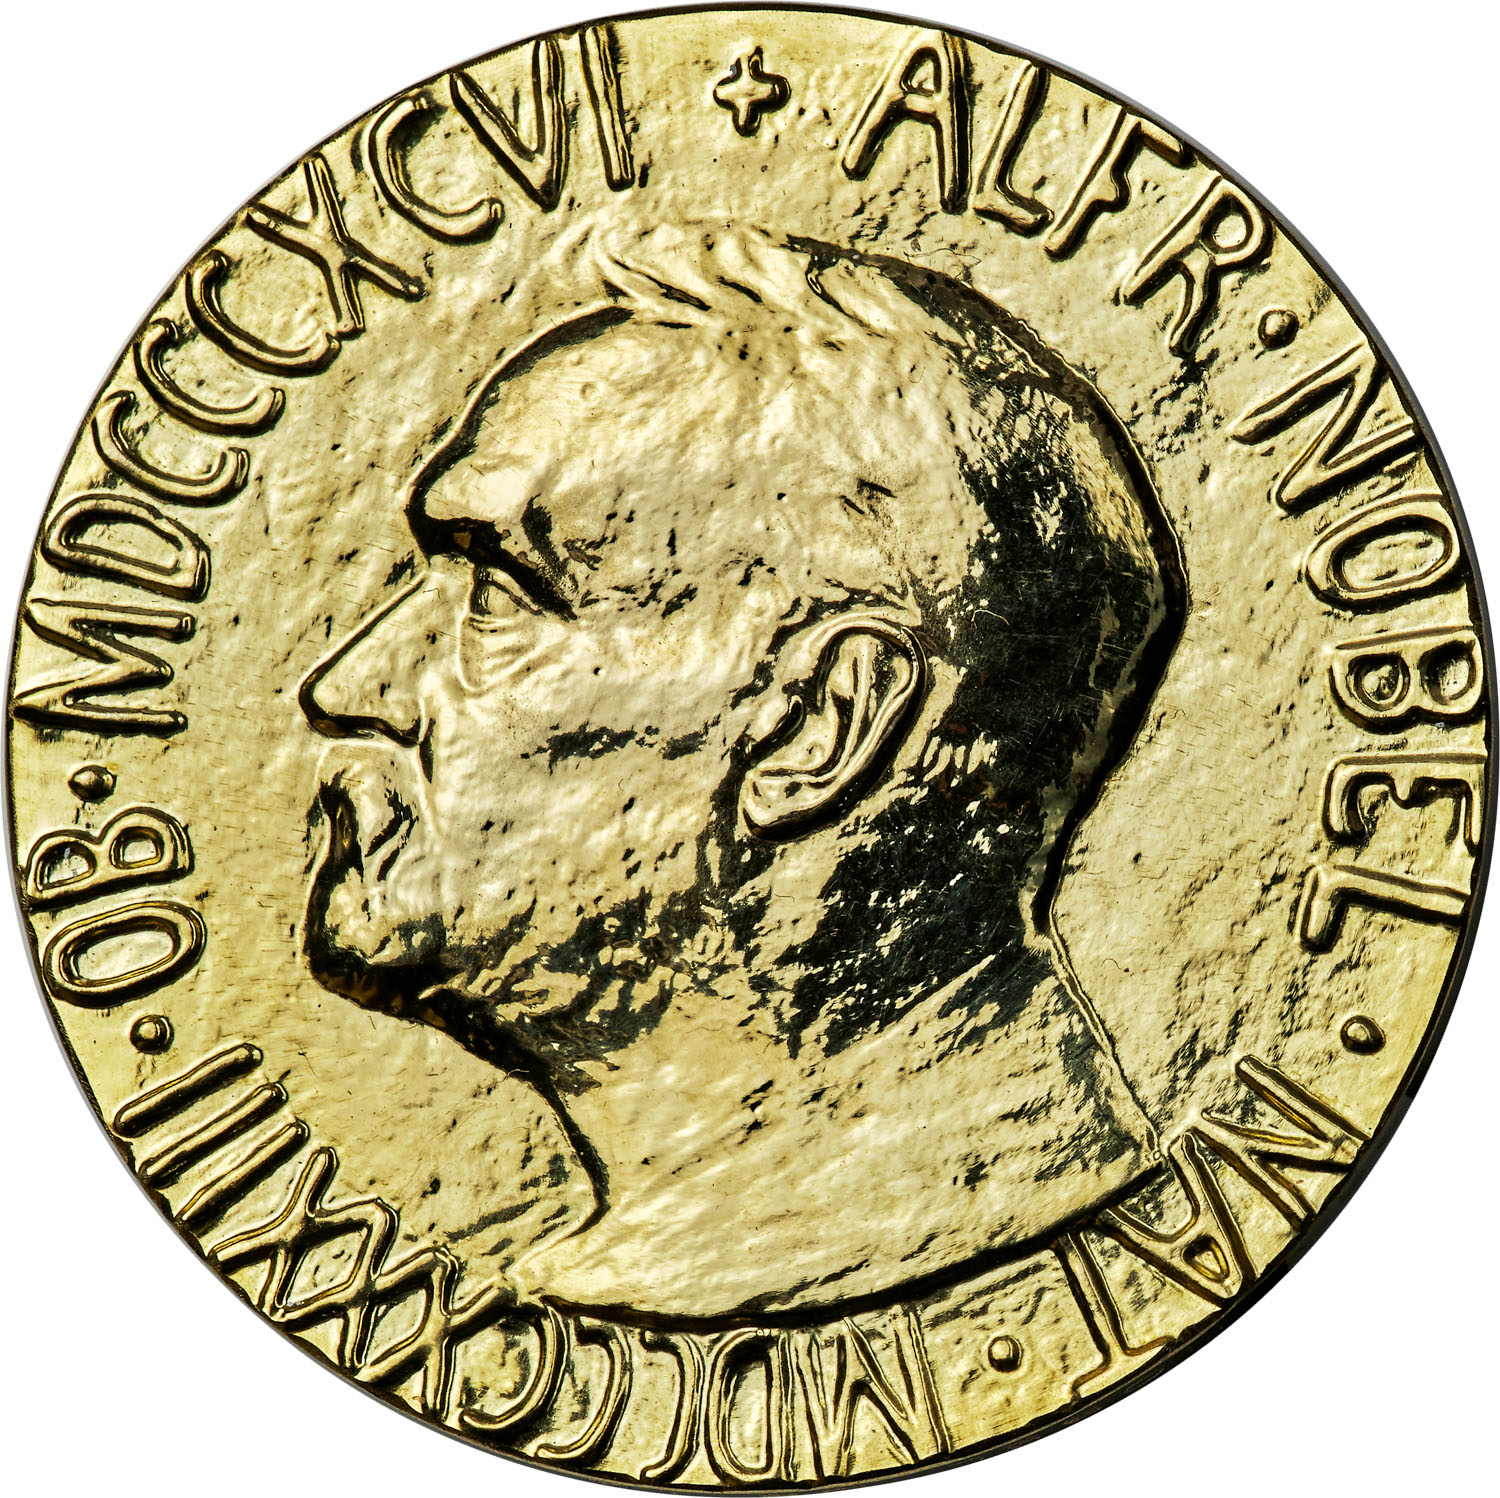 The front of the 2021 Nobel Peace Prize, which was awarded to Russian journalist Dmitry Muratov. On June 20, it sold for $103.5 million, with all proceeds going to UNICEF’s relief efforts in Ukraine and for Ukrainians affected by the war. Heritage Auctions waived all fees and commissions that it would normally collect from the sale. Image courtesy of Heritage Auctions